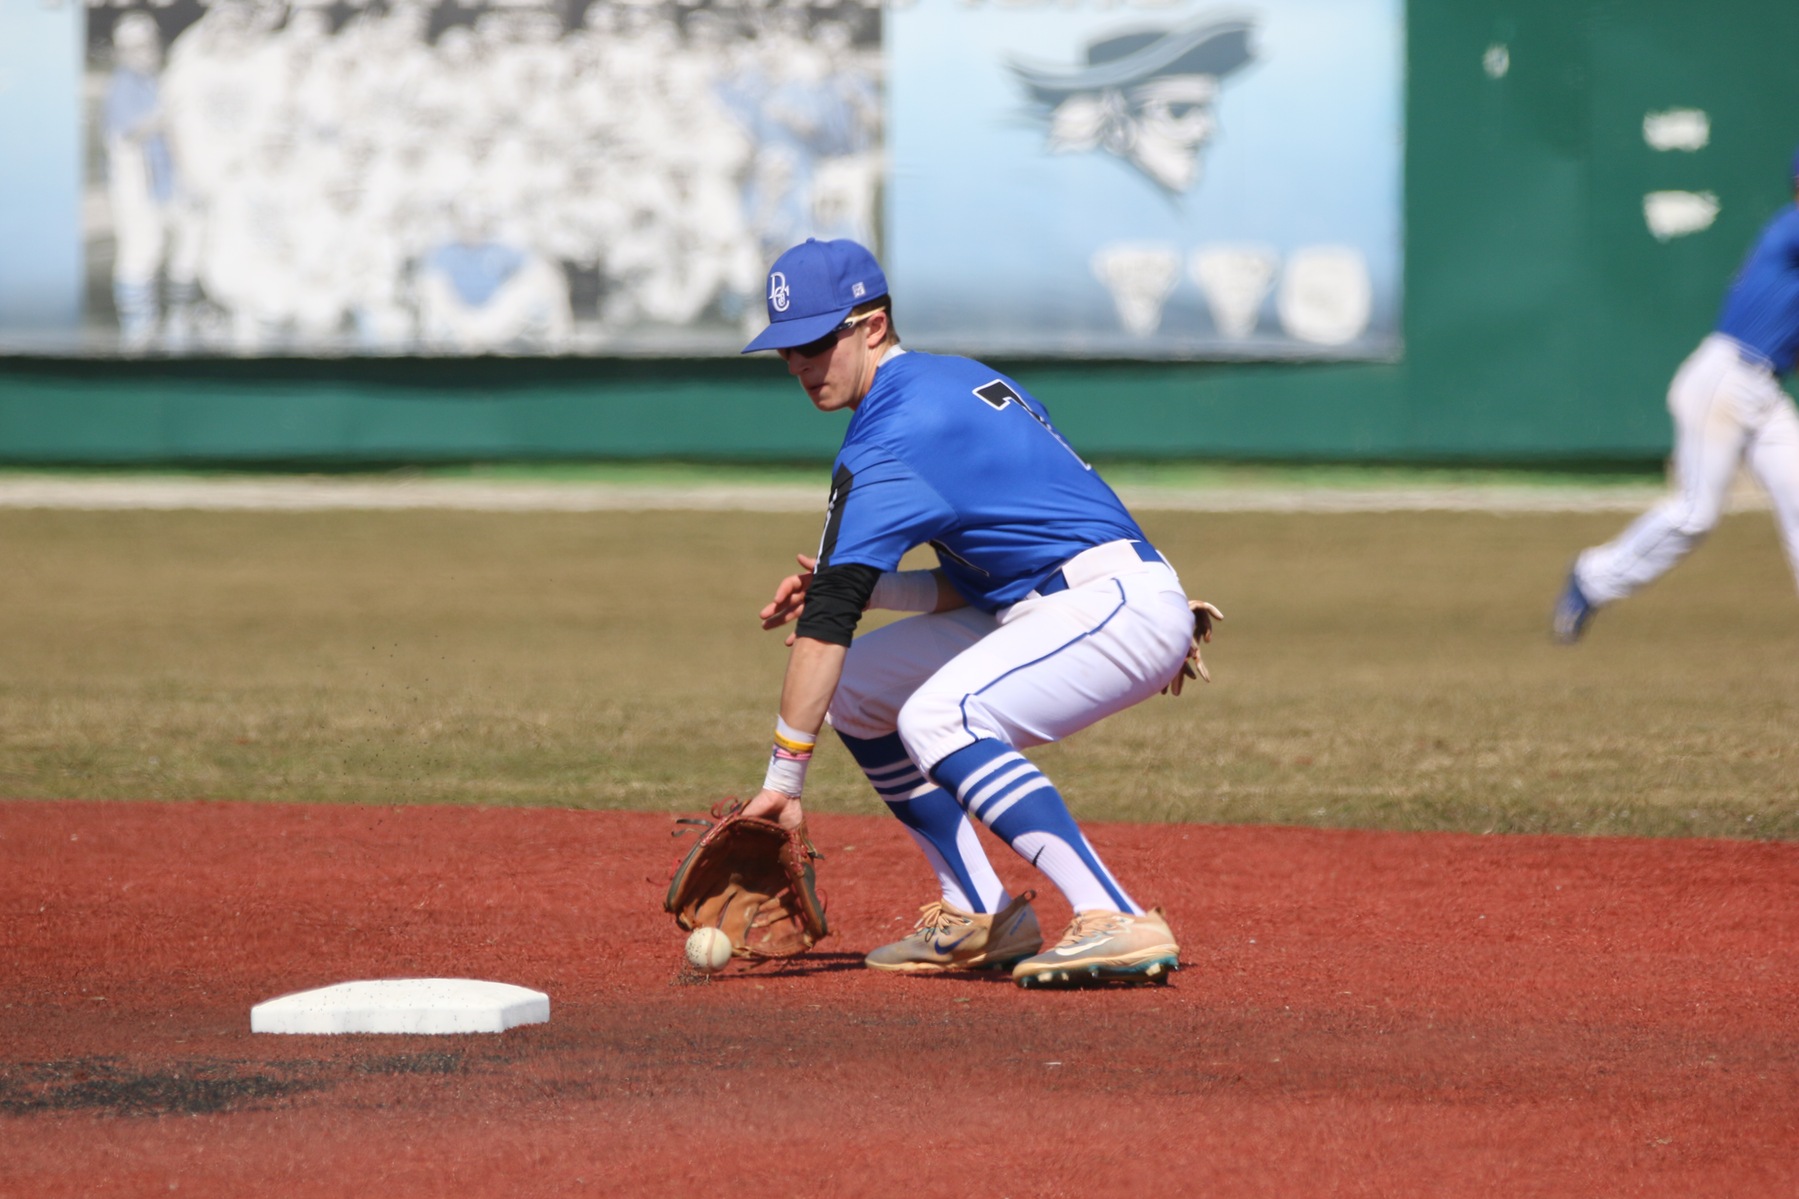 Baseball Fall to NIACC in game one, game two halted due to darkness (to be resumed May 1st)